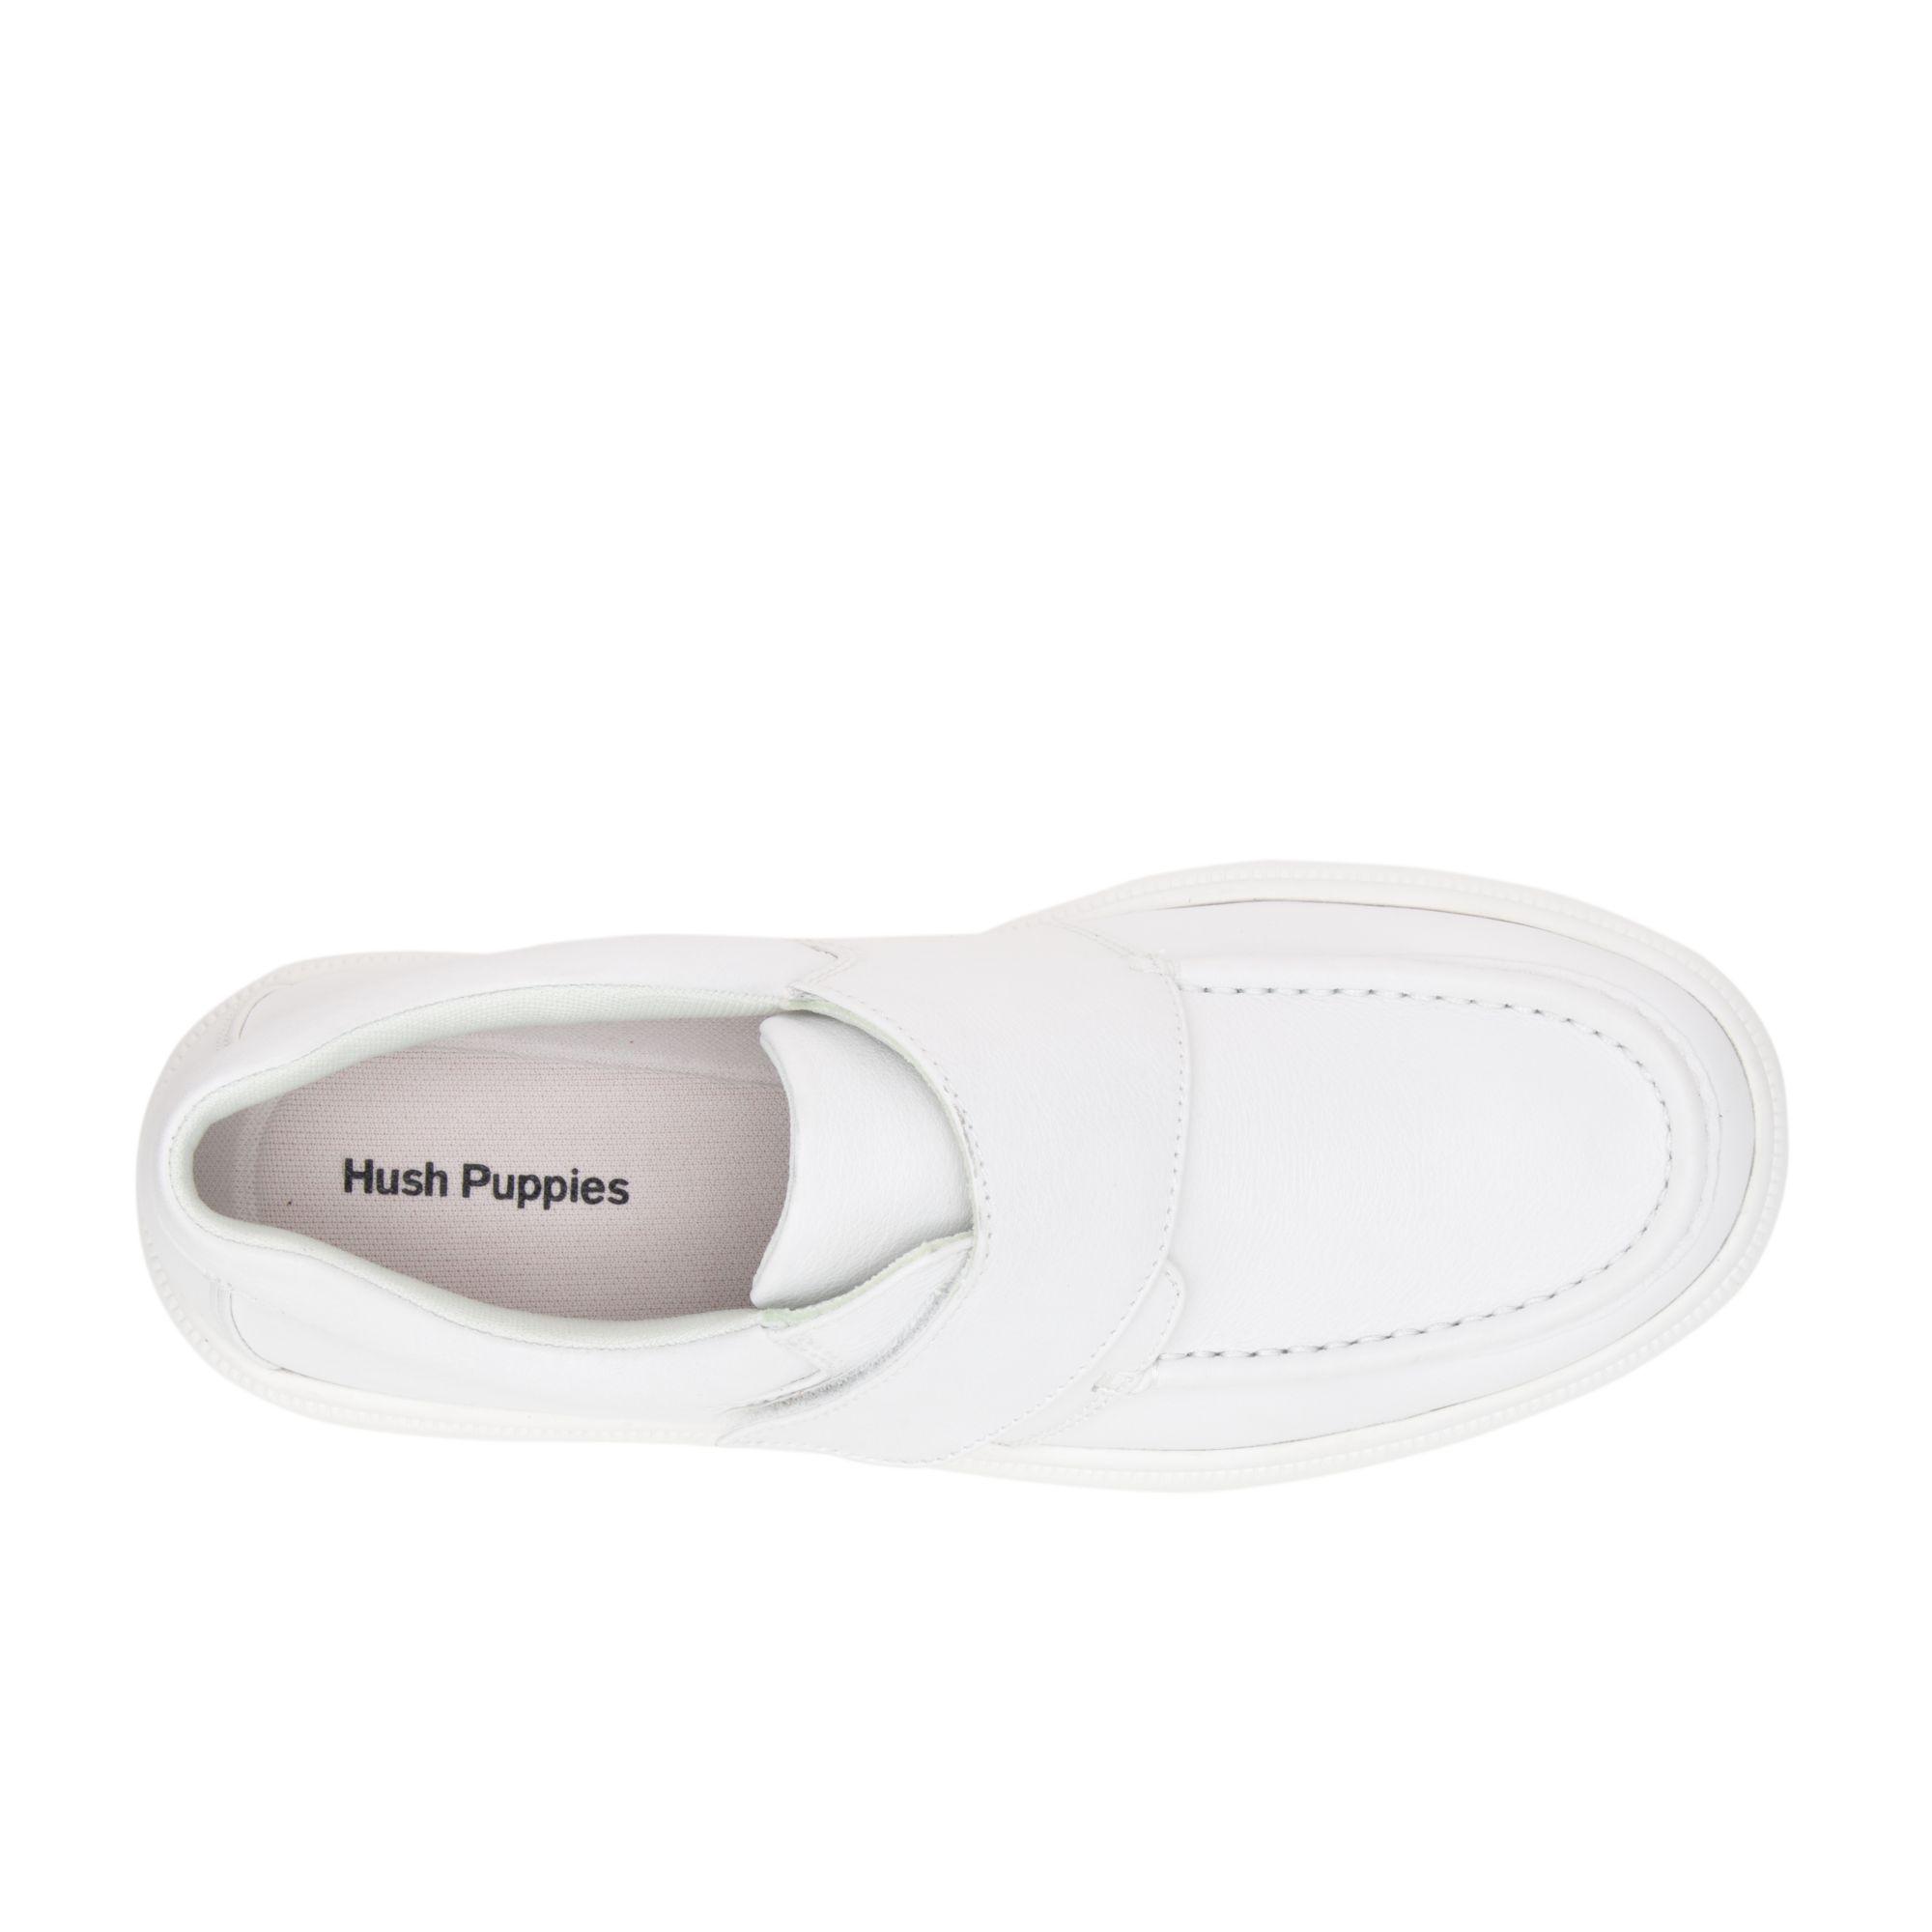 hush puppies white leather shoes